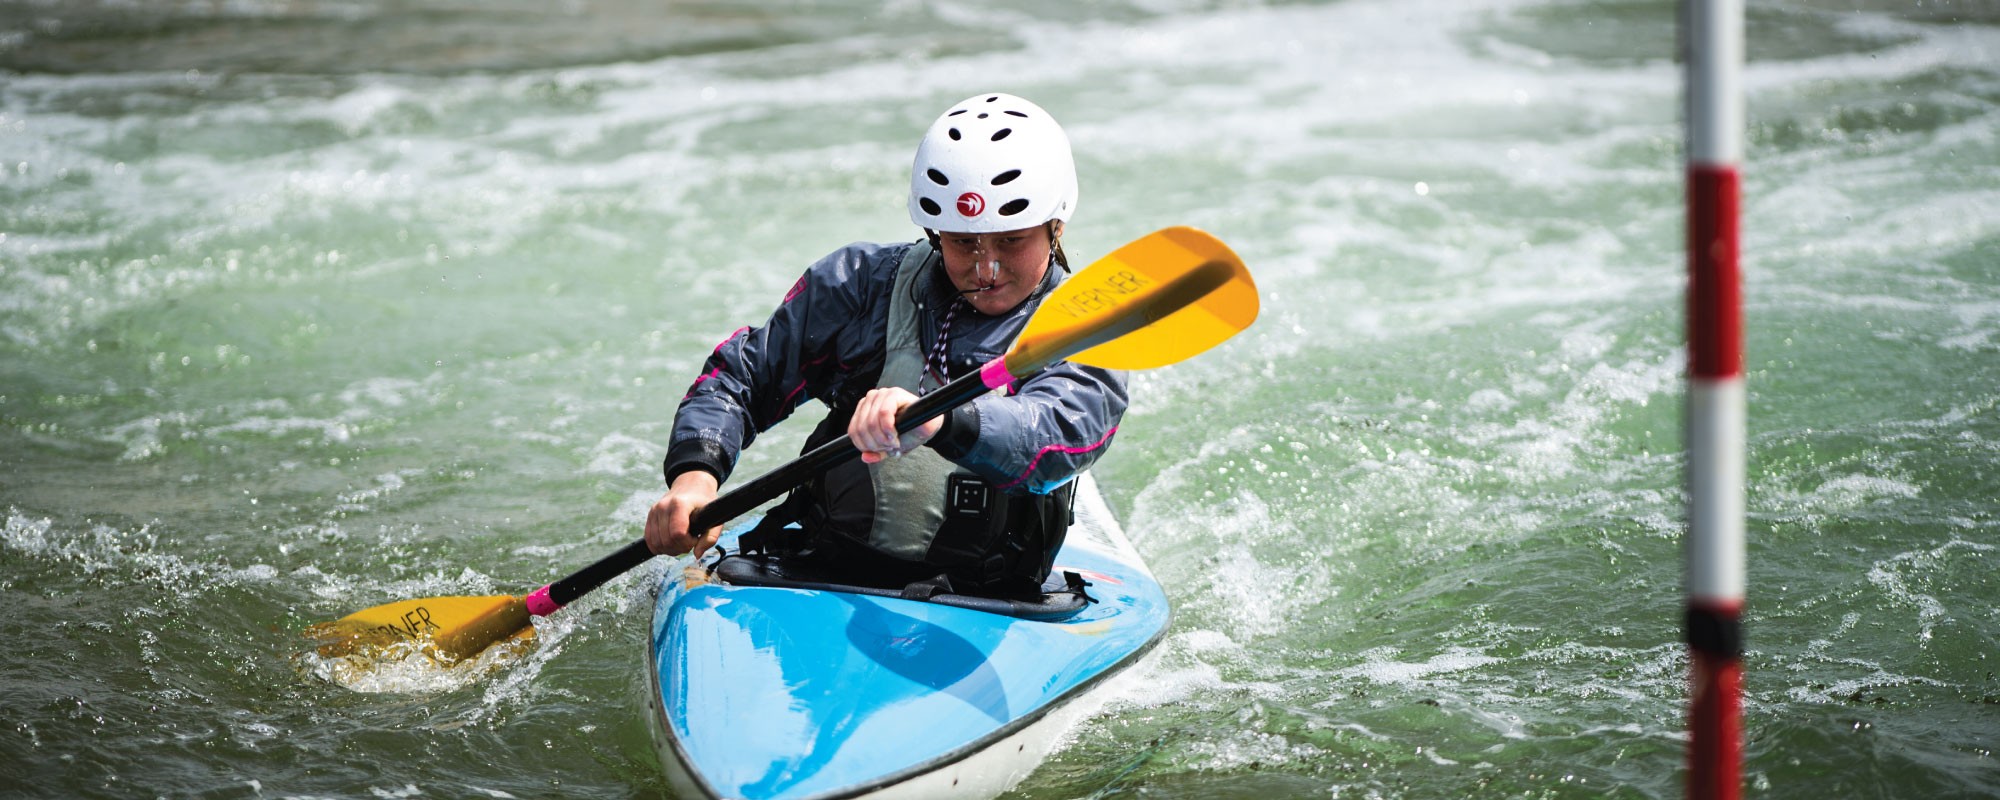 Nice Images Collection: Whitewater Slalom Desktop Wallpapers